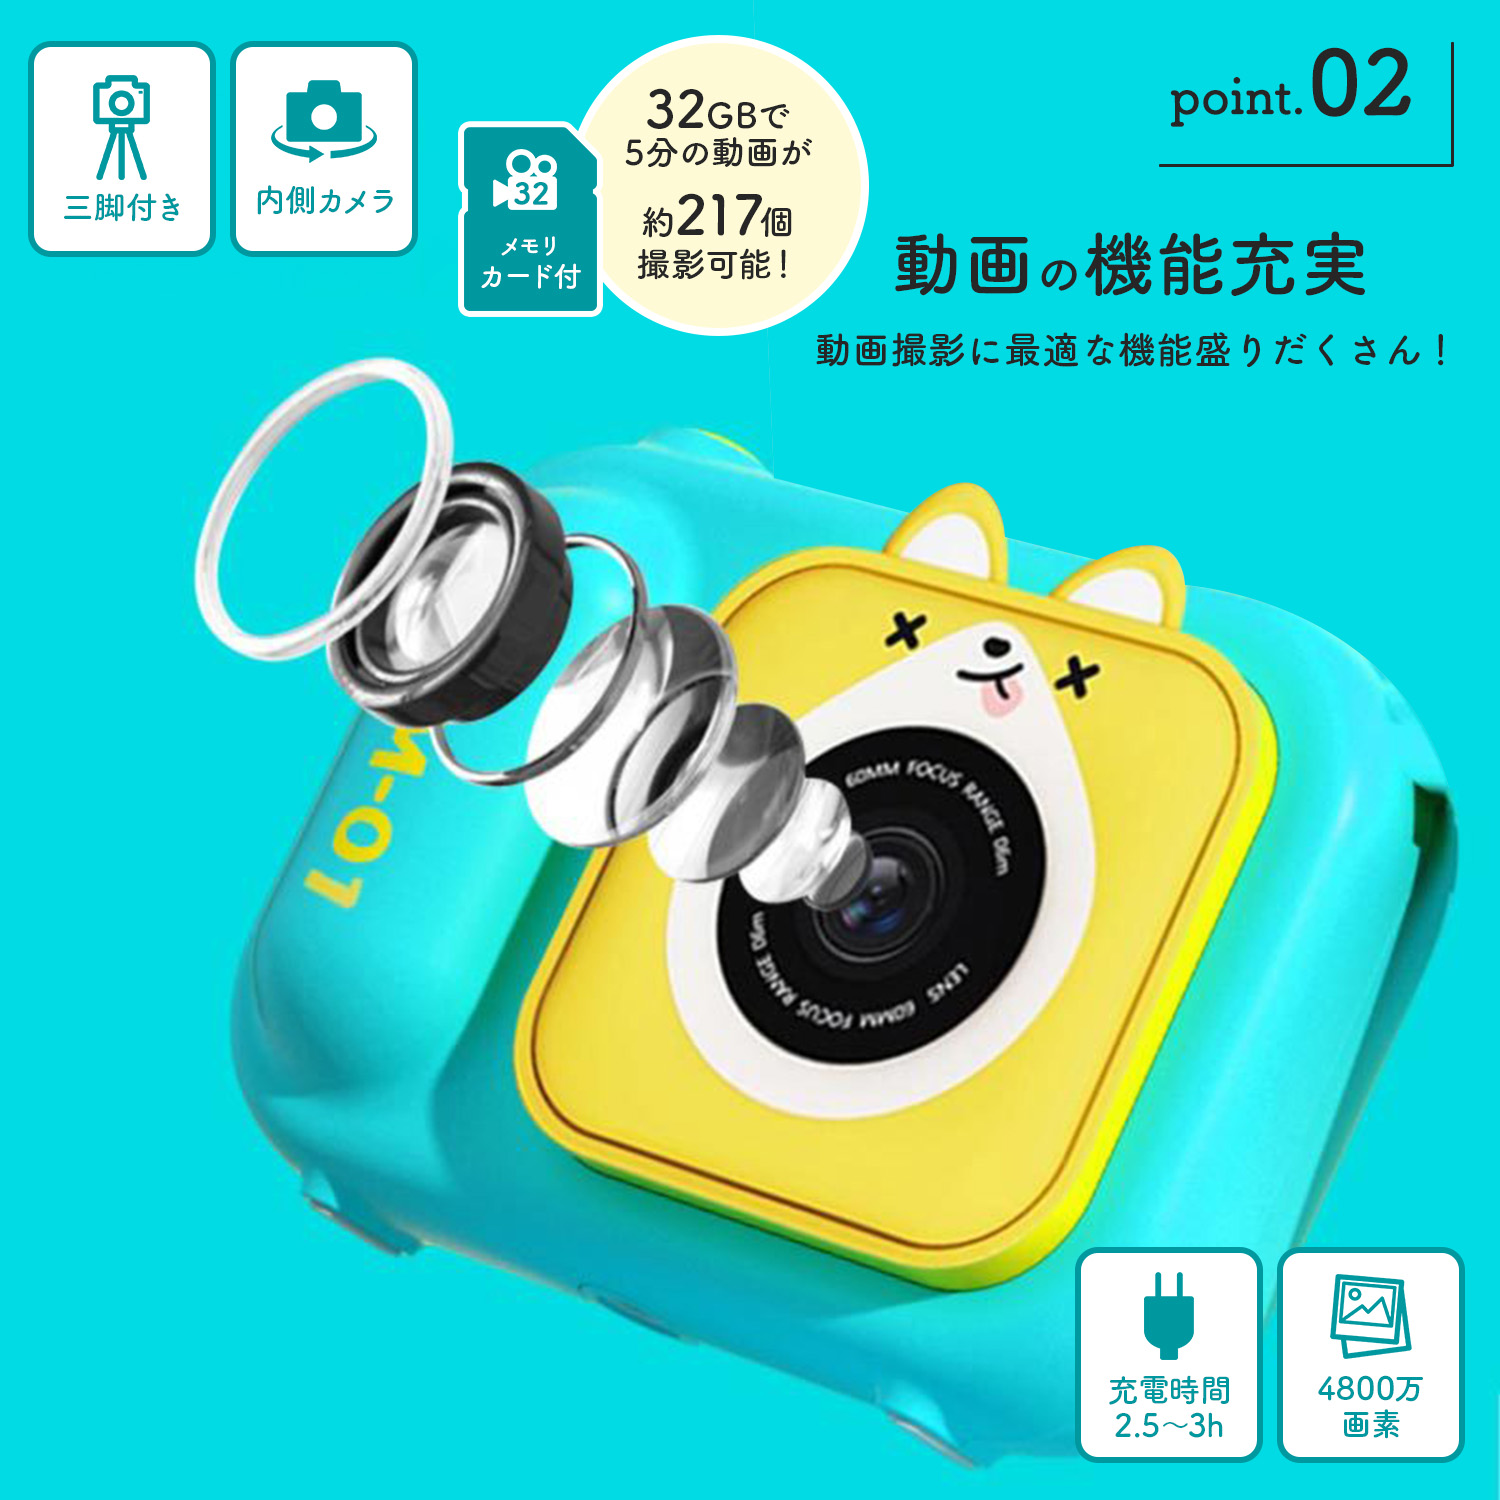  Kids camera digital camera for children 3 -years old 4 -years old 5 -years old 4000 ten thousand pixels three with legs photograph animation 32GB SD card attaching game built-in toy toy camera Christmas present 